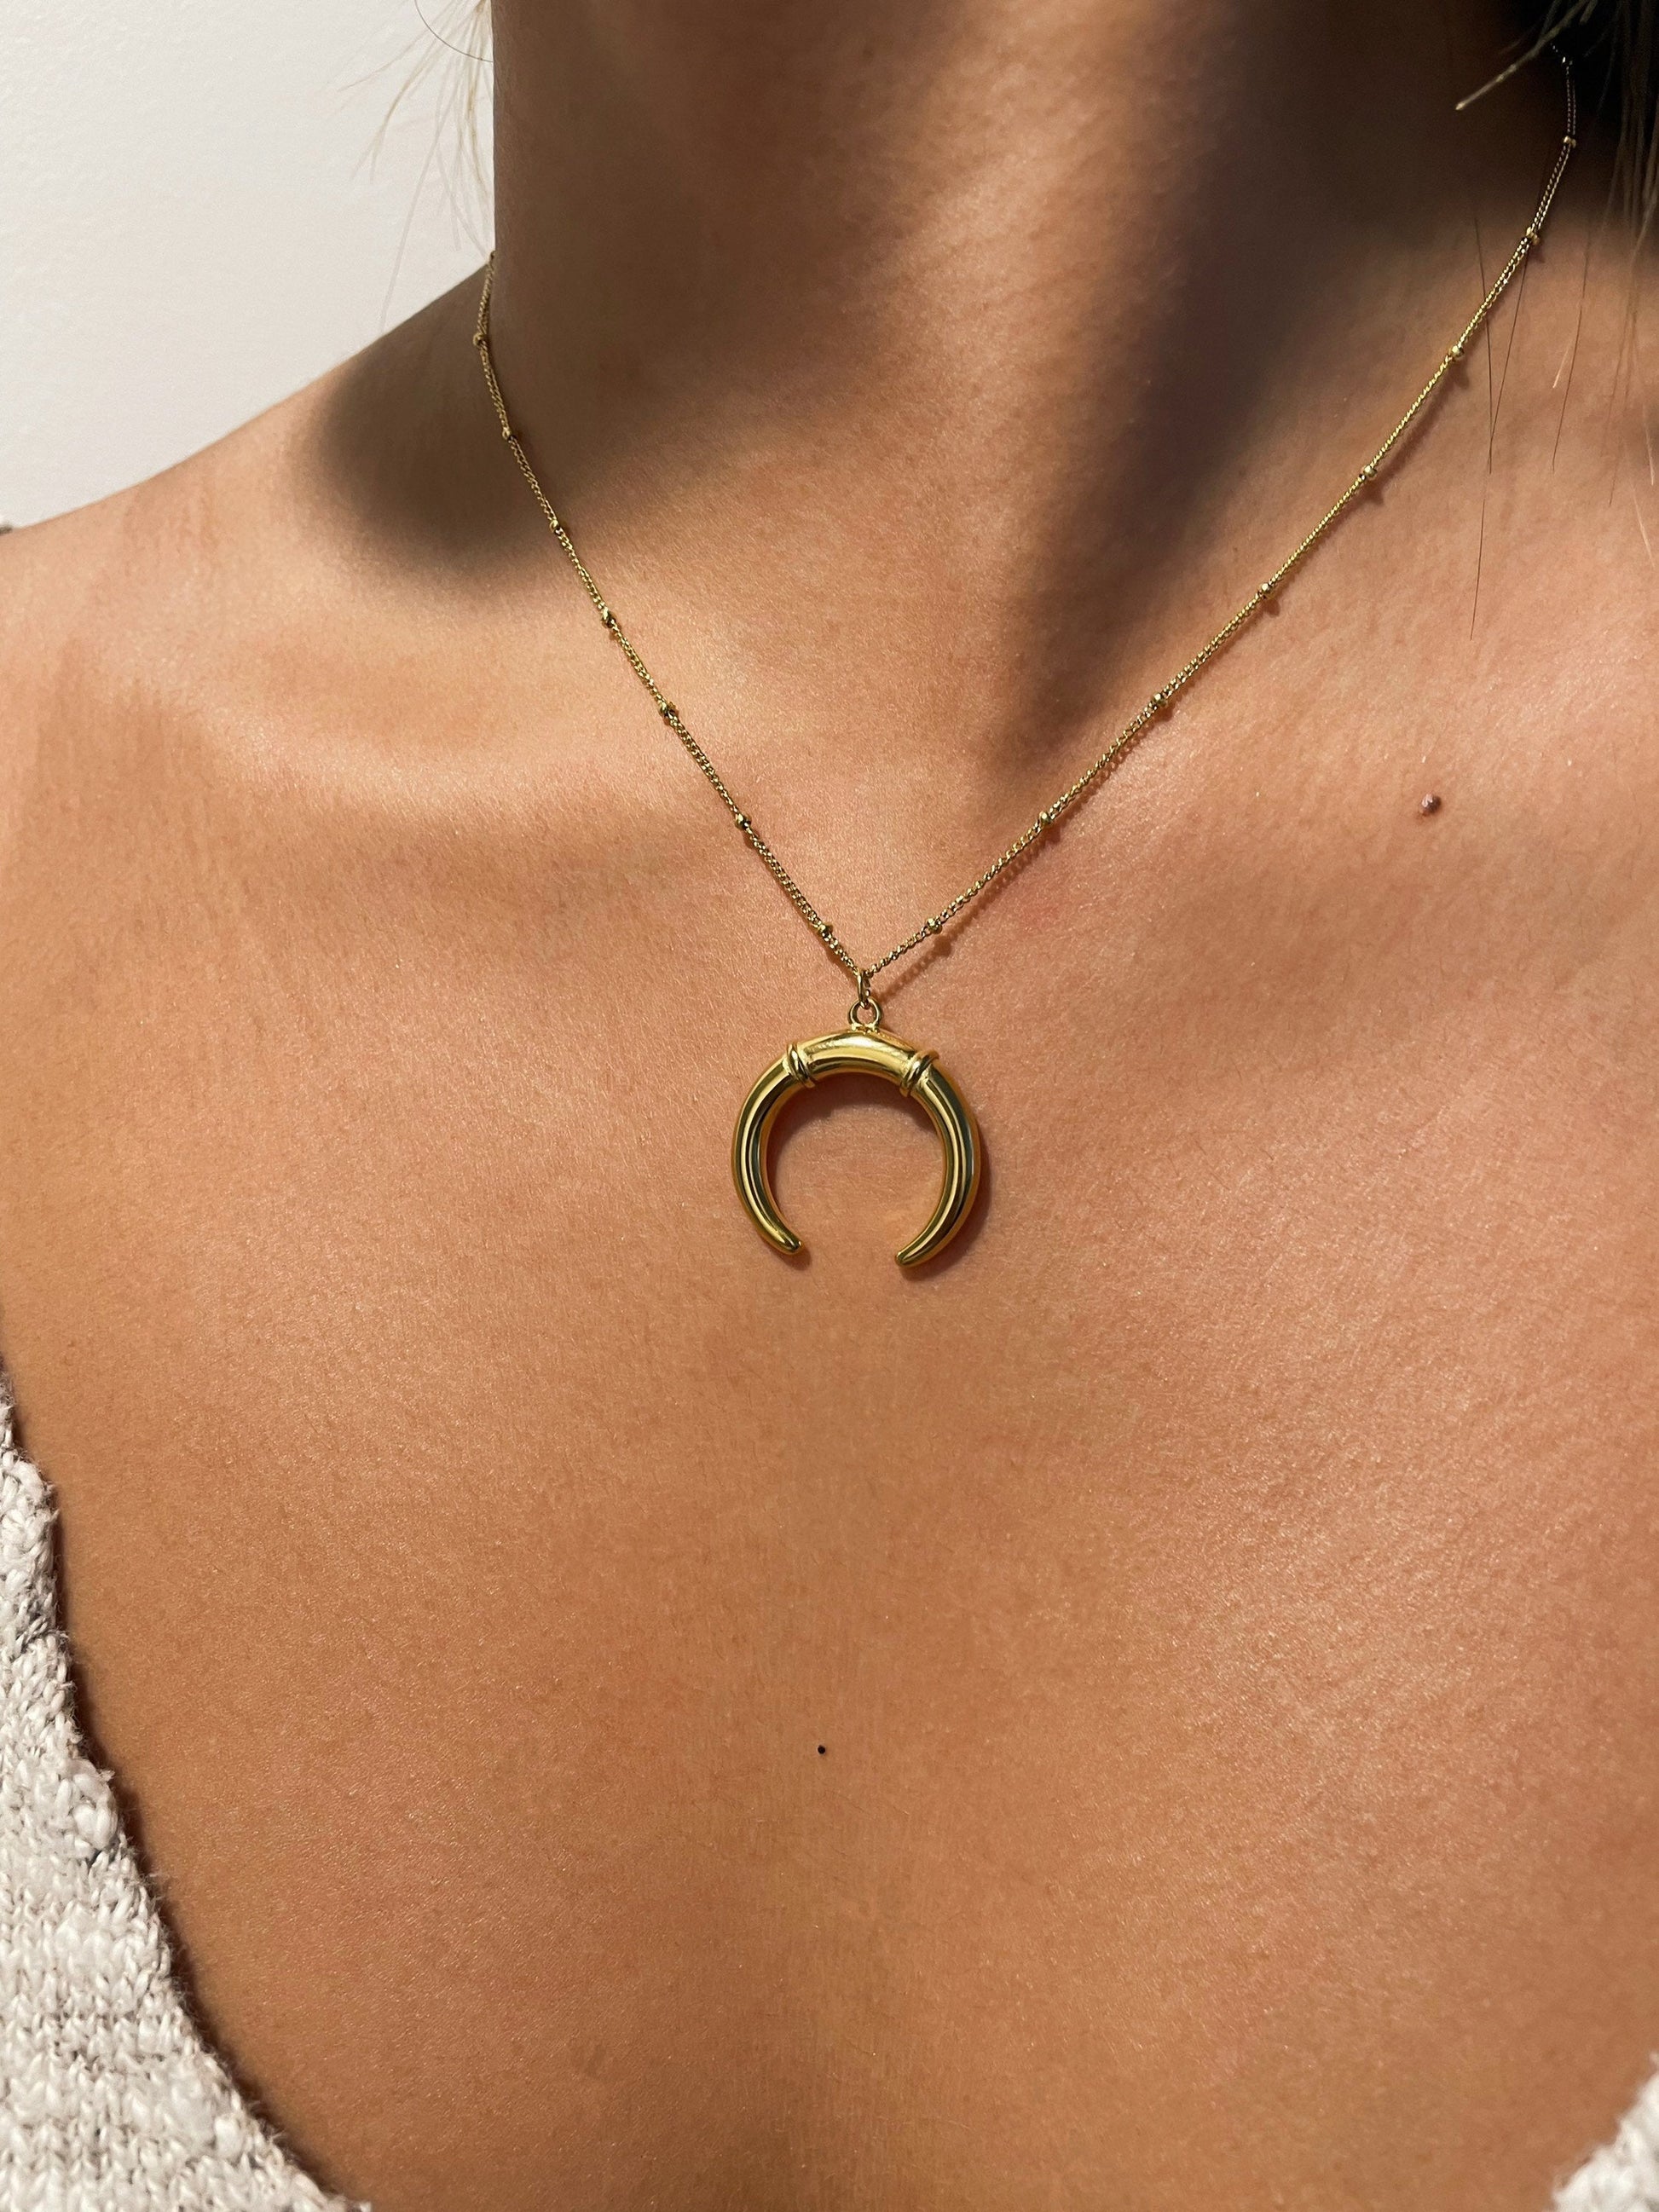 Crescent Moon Necklace Tusk Necklace Upside Down Moon 